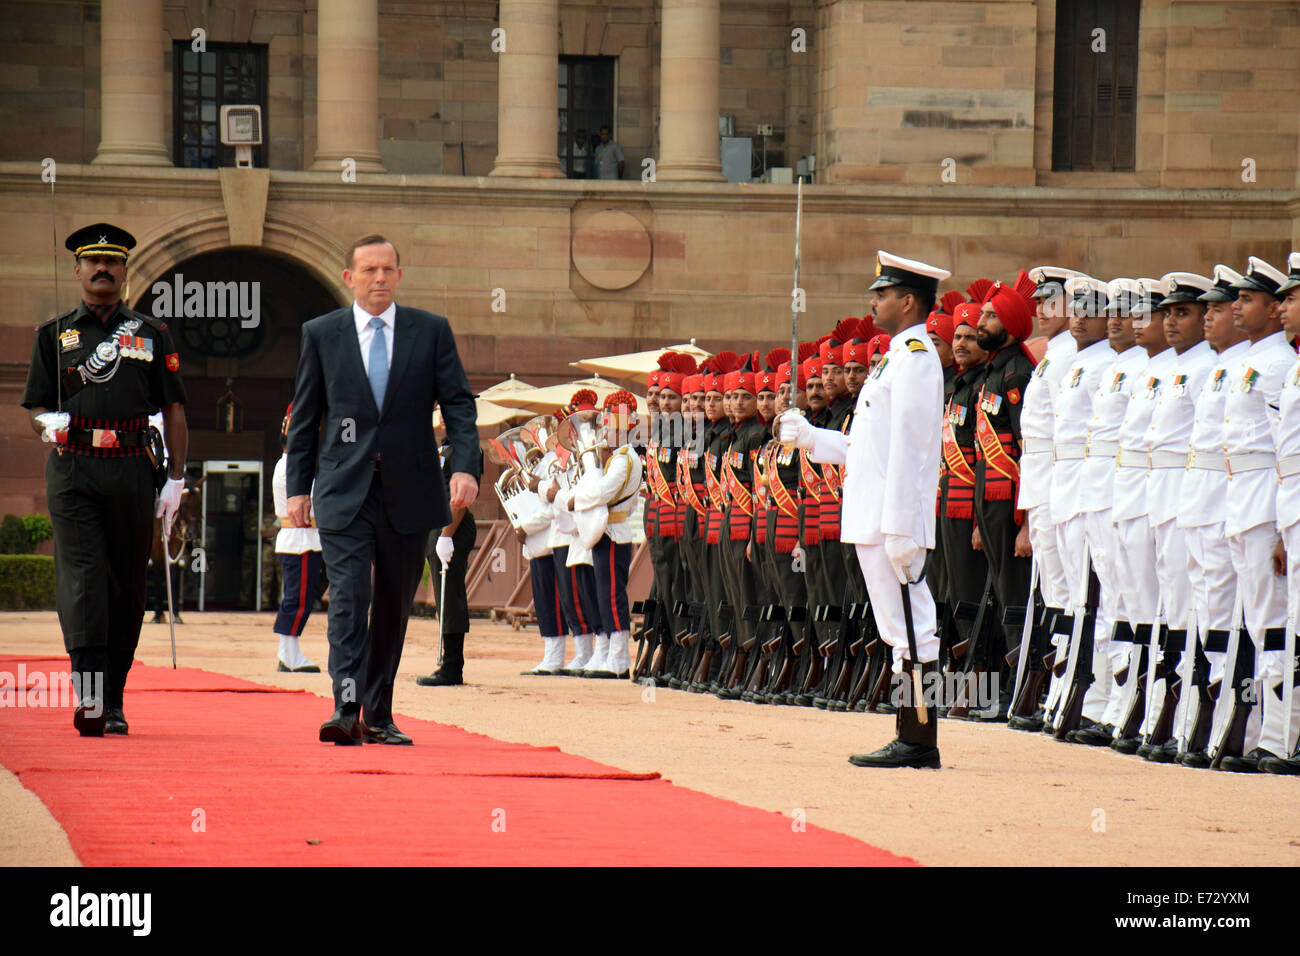 New Delhi, India. 5th Sep, 2014. Australian Prime Minister Tony Abbott (C) inspects the honor guards during a welcoming ceremony at the Presidential Palace in New Delhi, capital of India, on Sept. 5, 2014. Credit:  Partha Sarkar/Xinhua/Alamy Live News Stock Photo